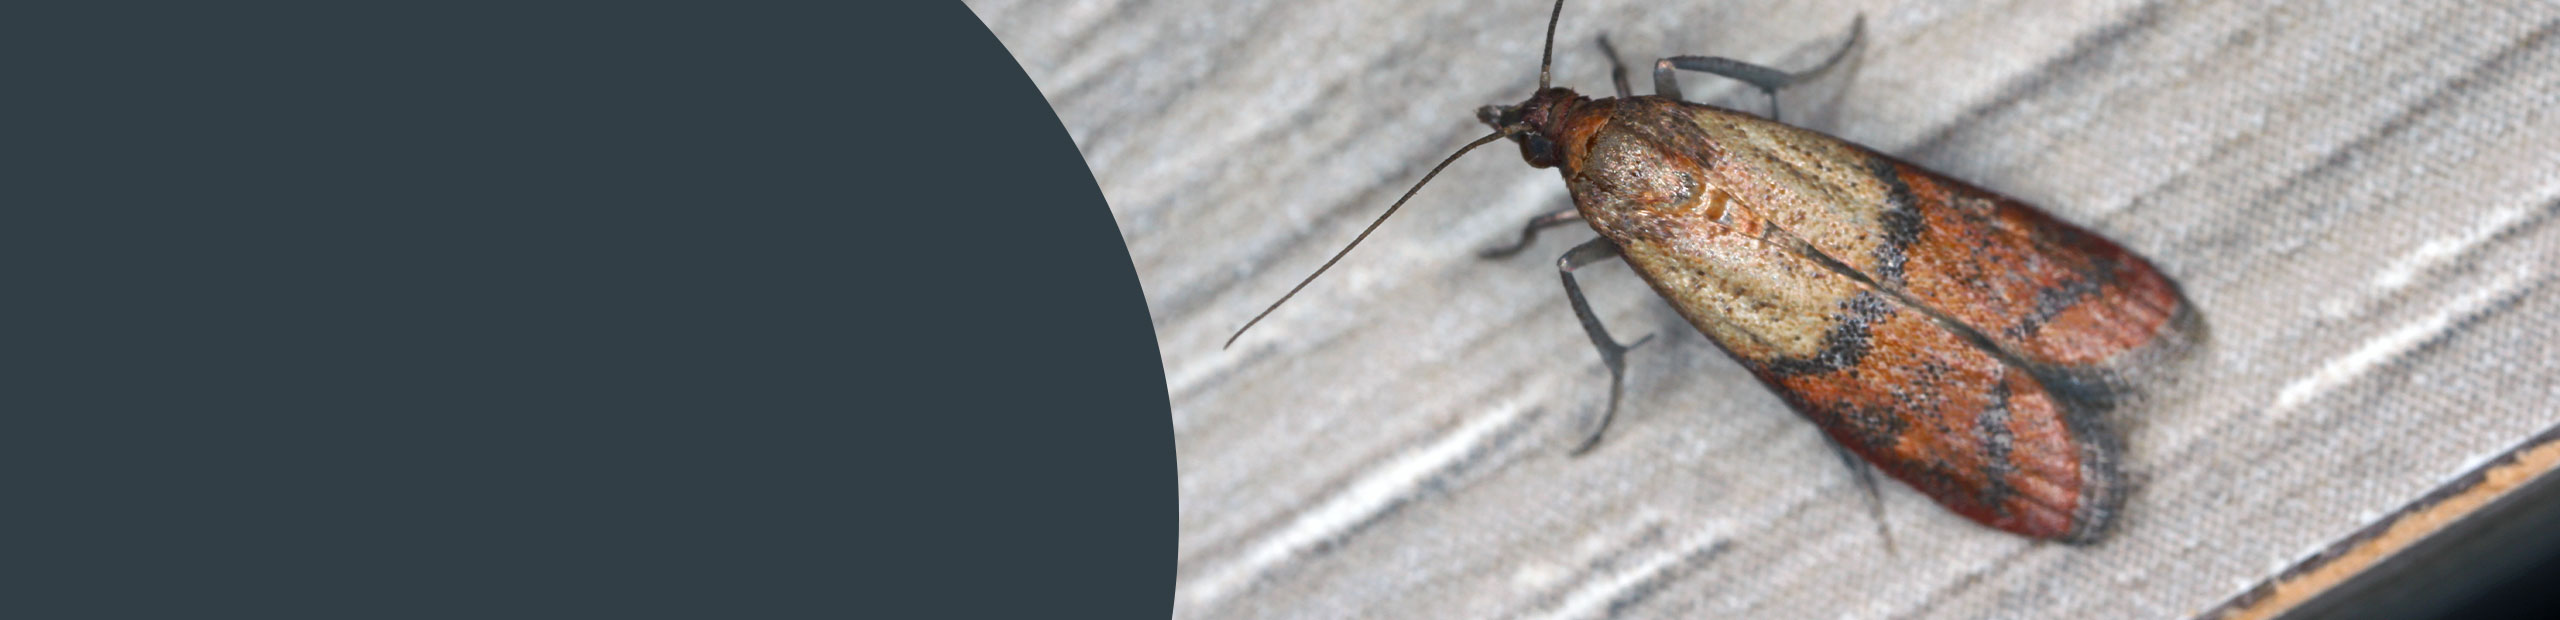 Insect Removal Services - Islington